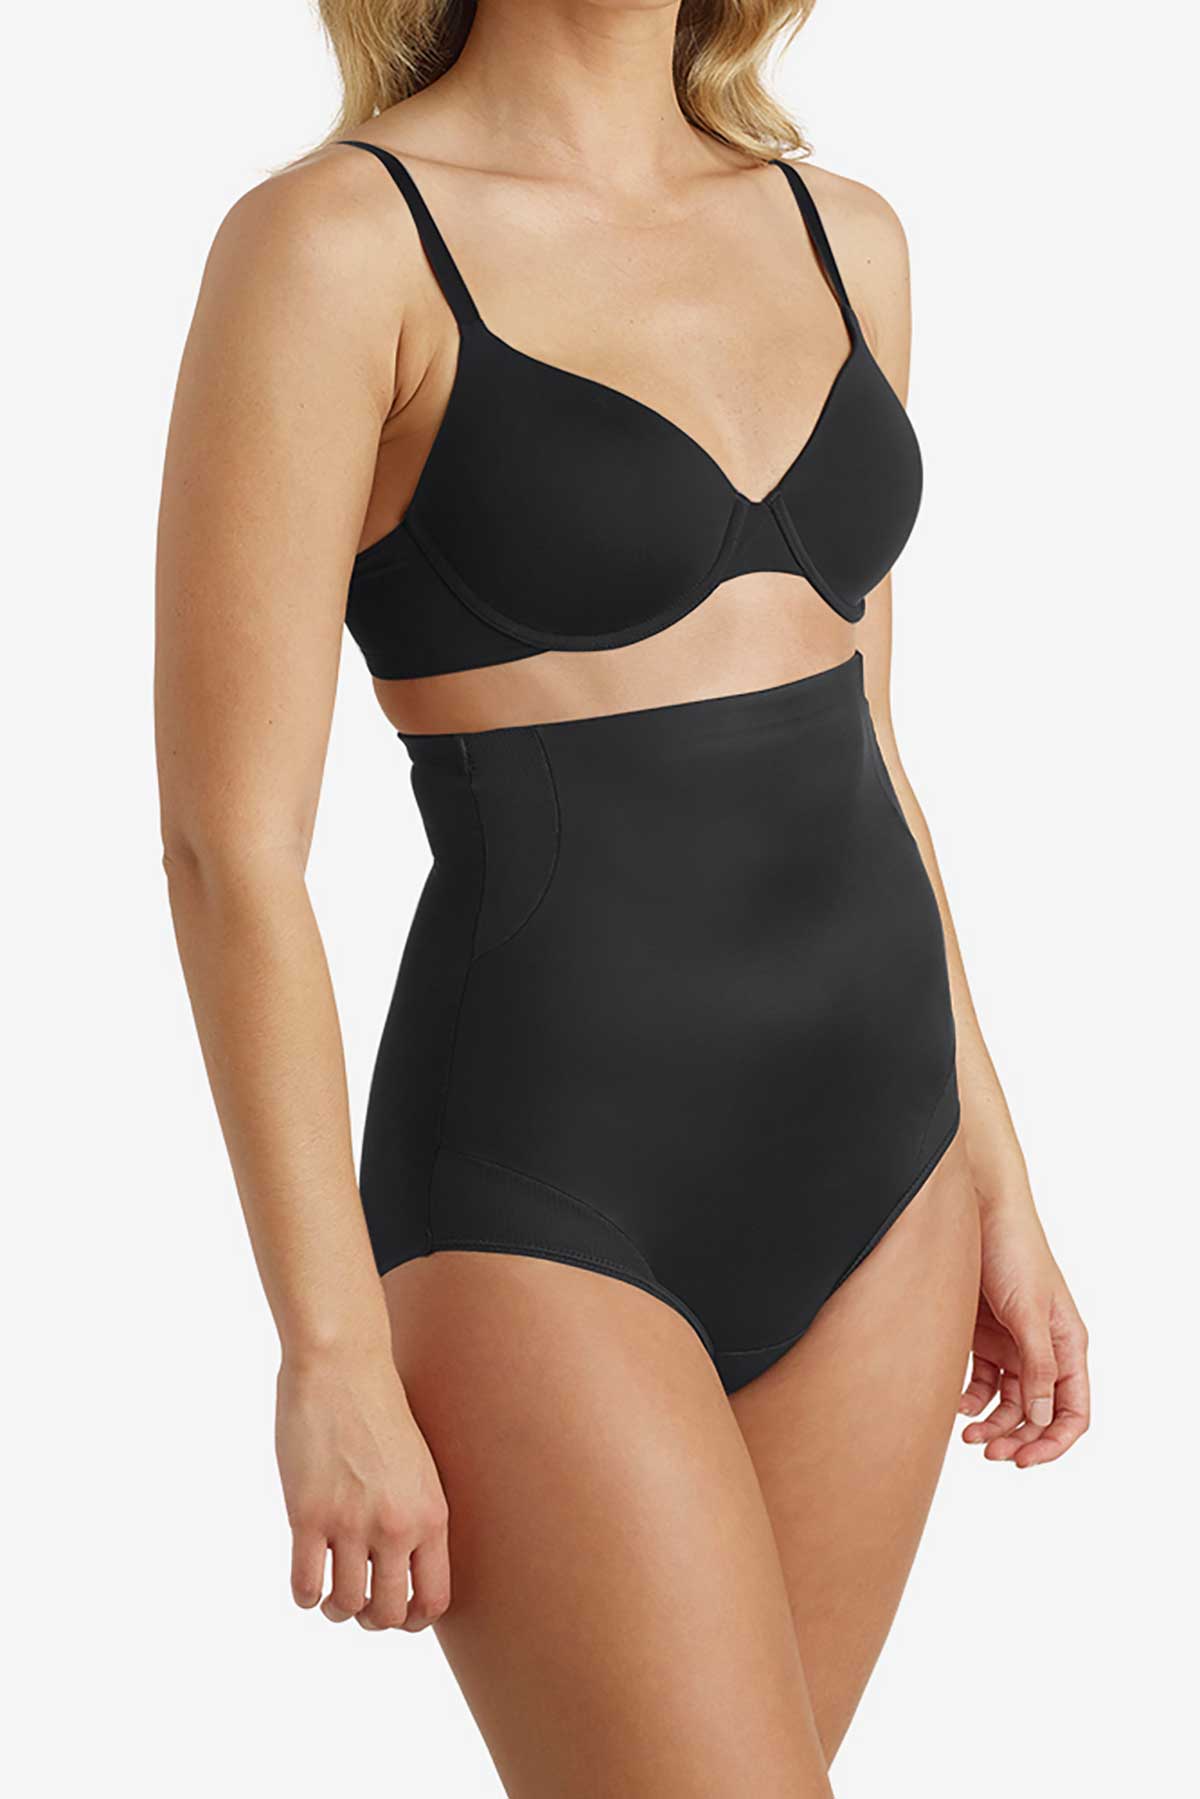 Shapewear Firm Control Brief Knickers High-Waisted Slimming Brand